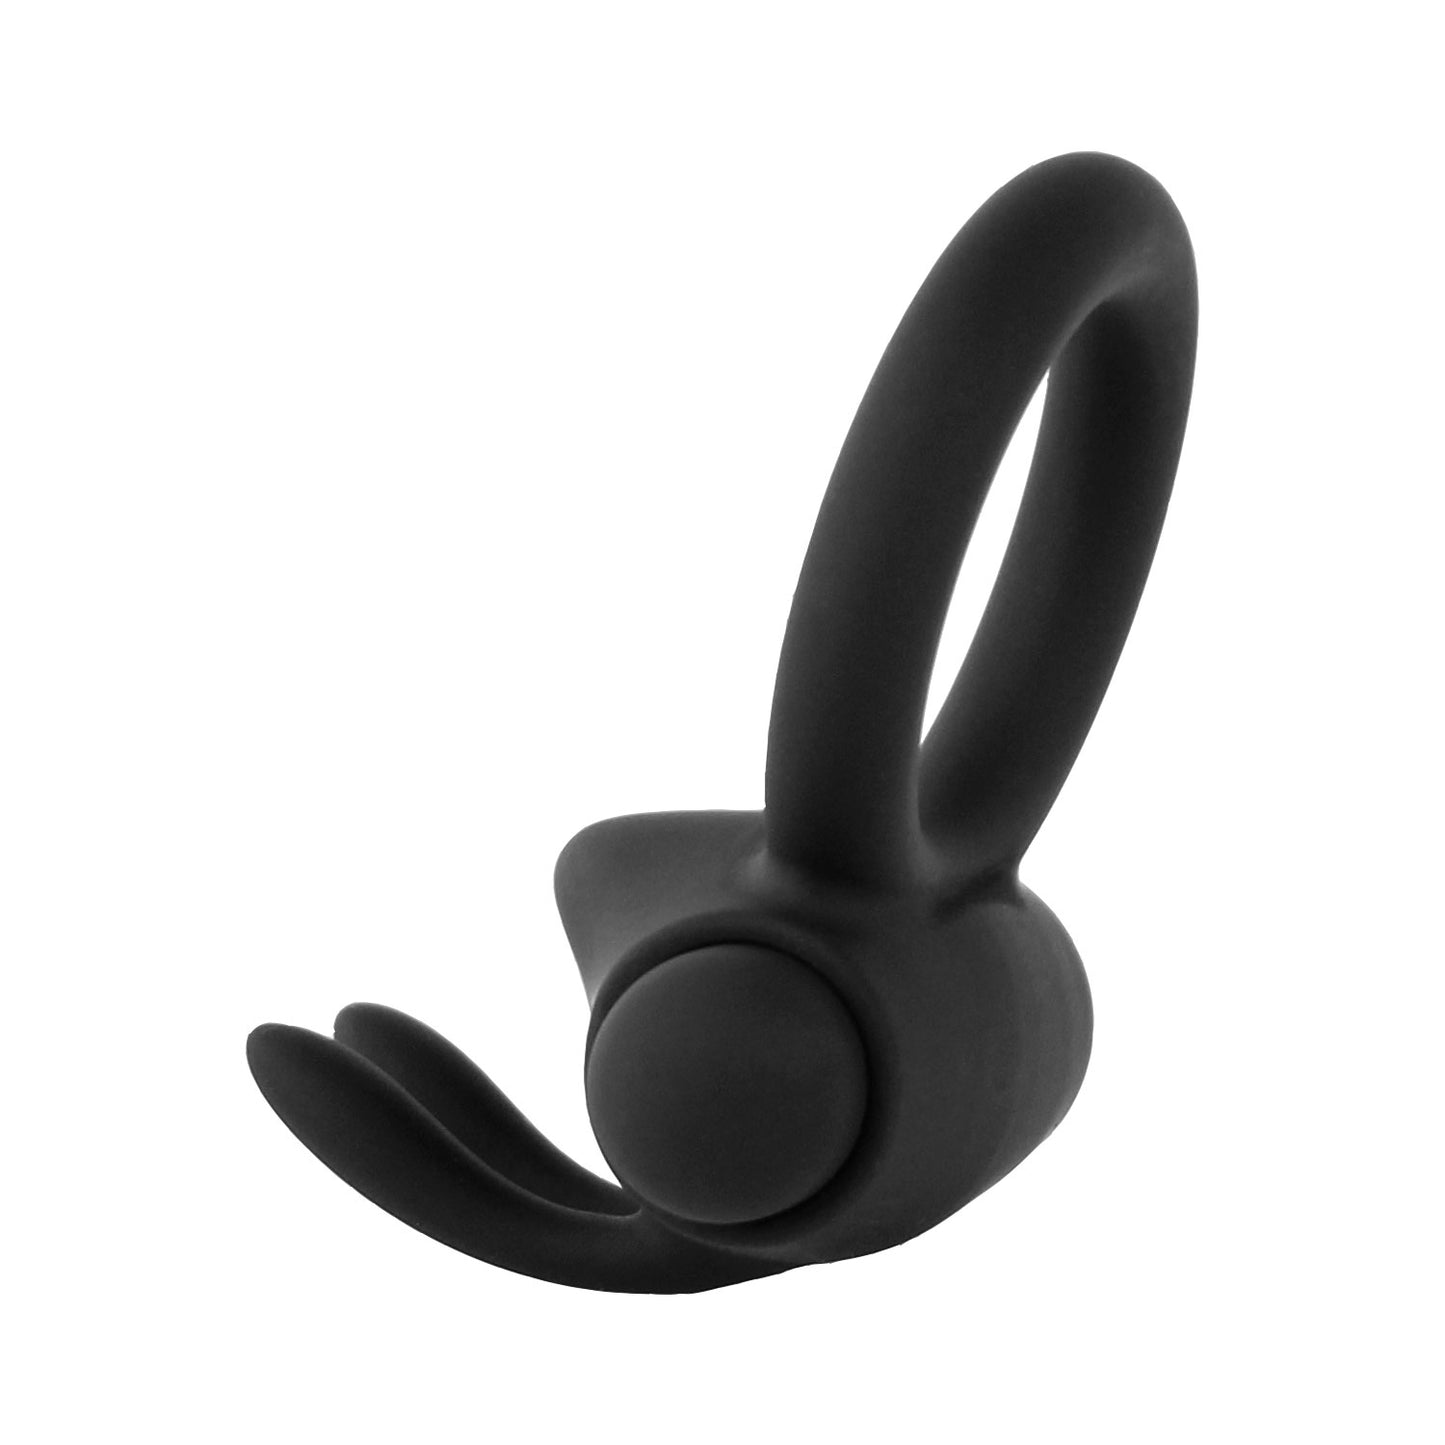 The Horny Company - John O BOOST Rechargeable Vibrating Single Cock Ring